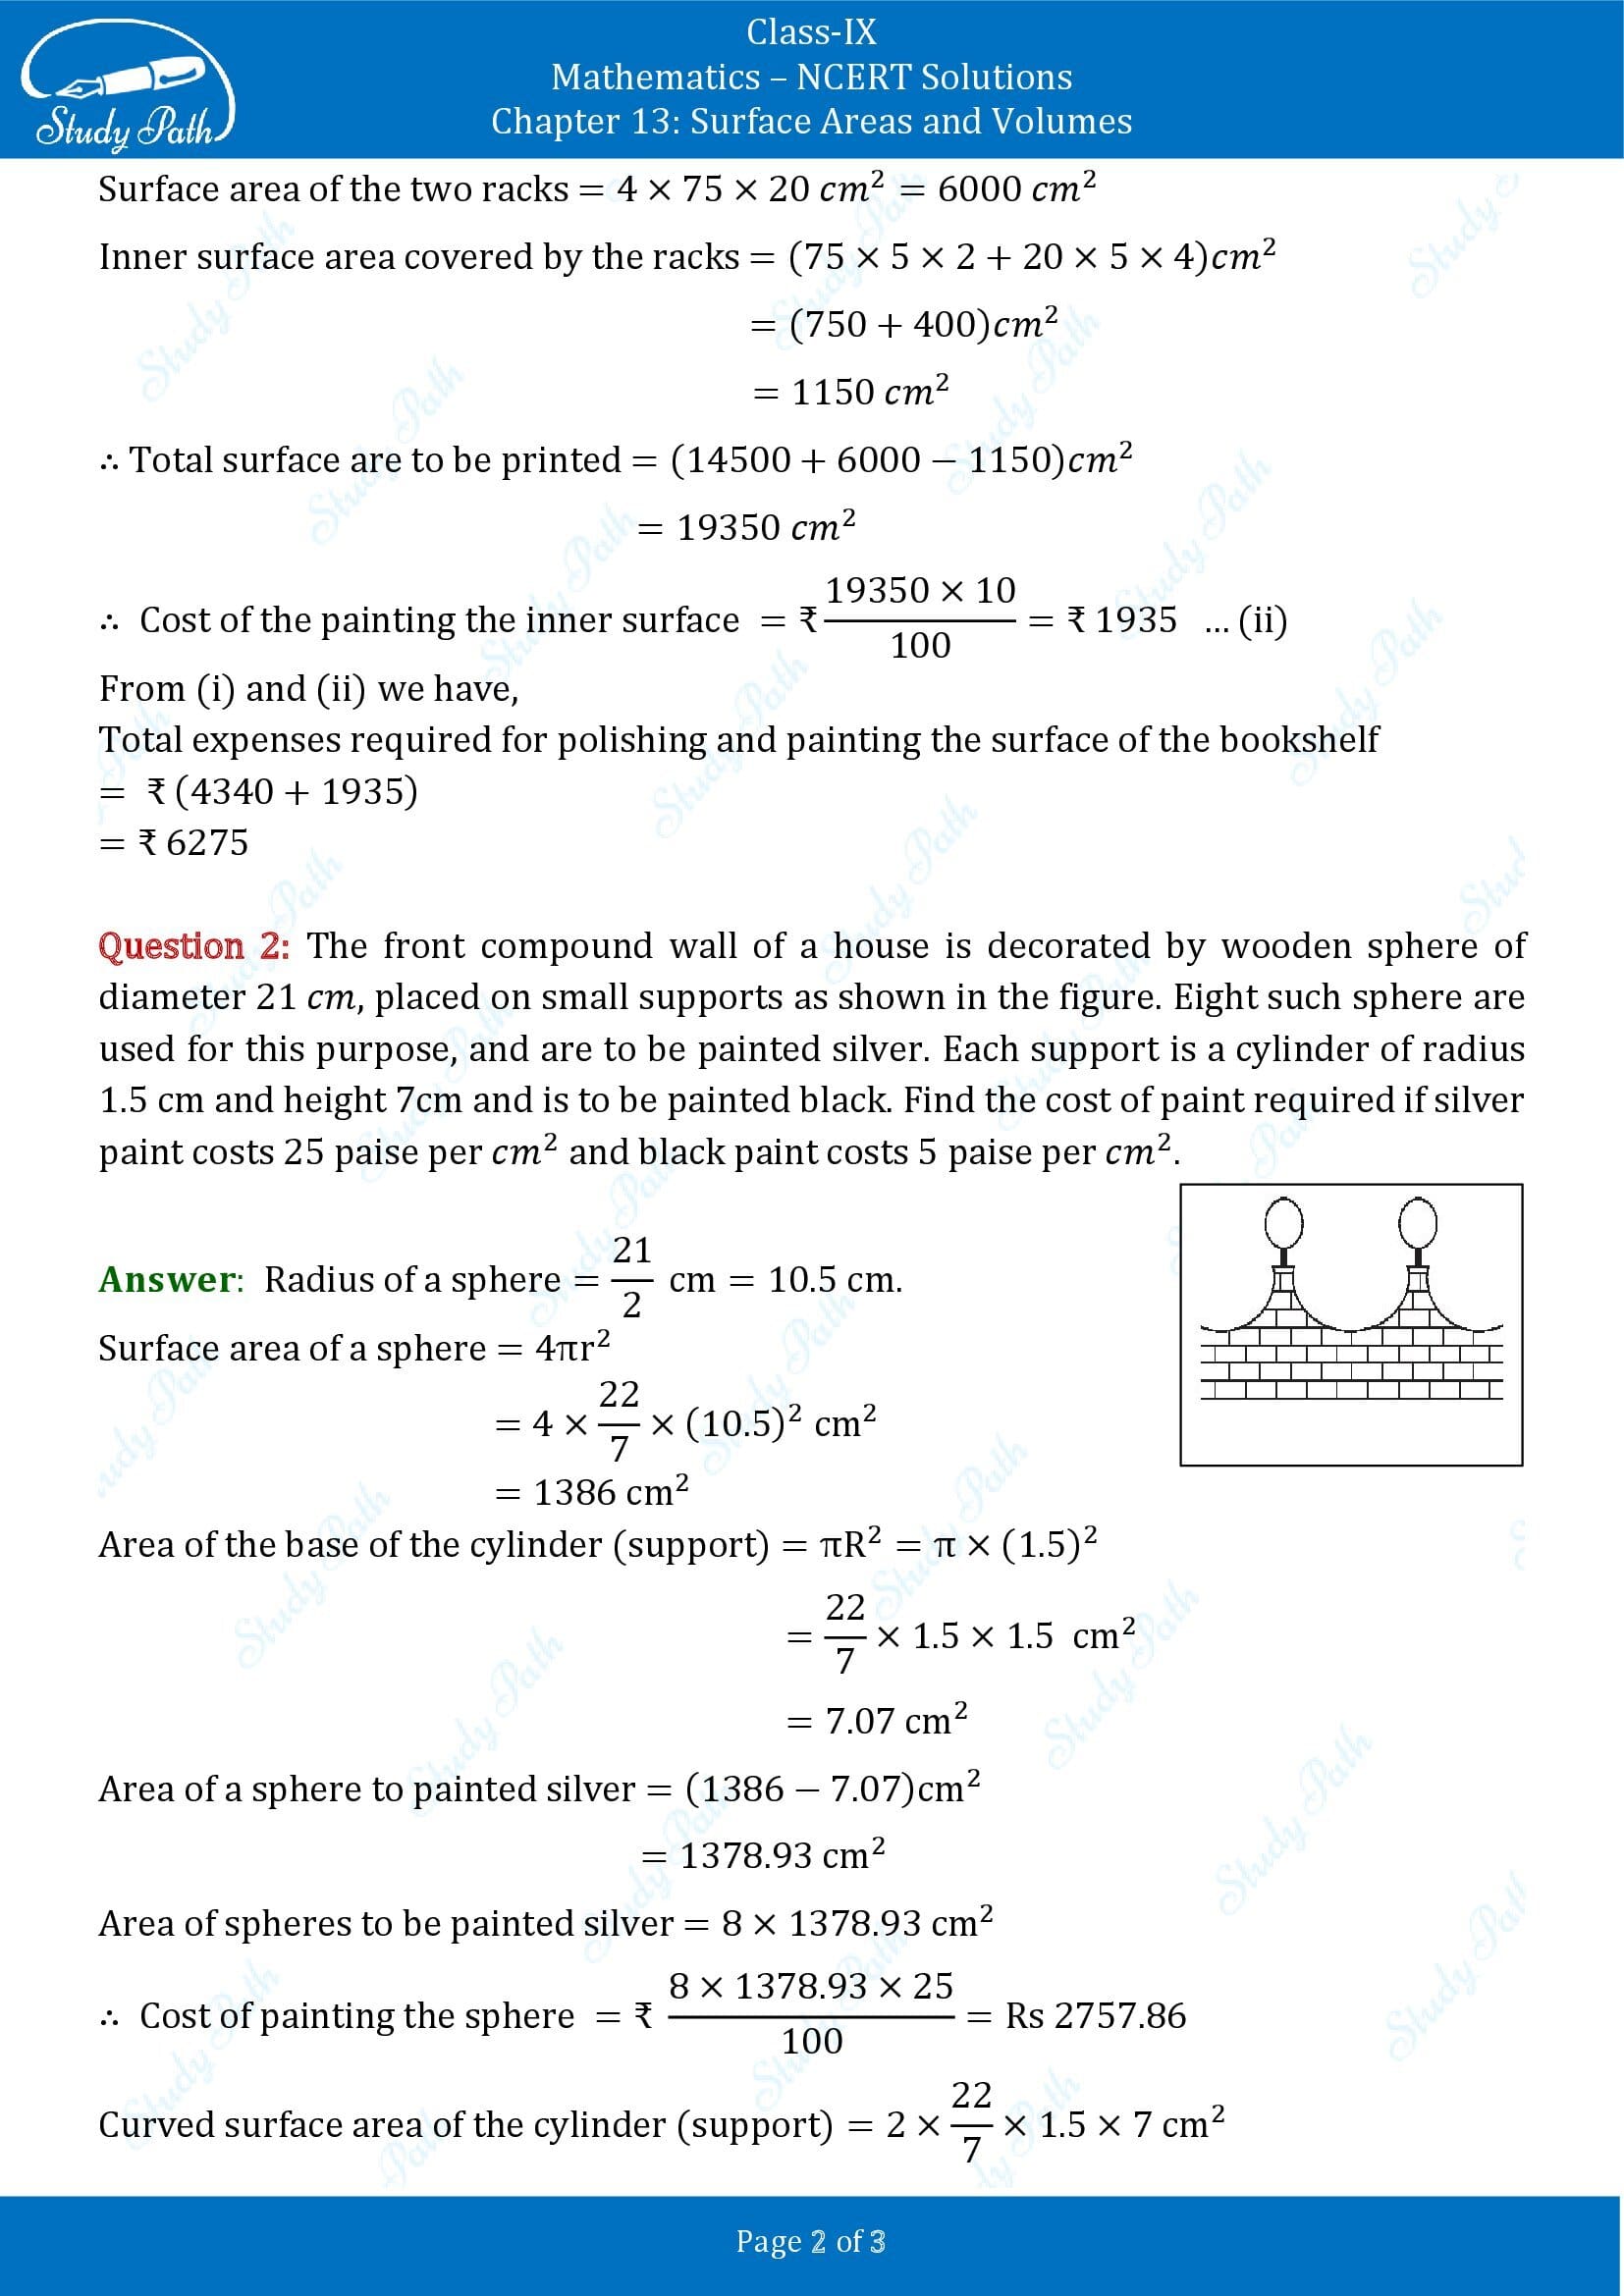 NCERT Solutions for Class 9 Maths Chapter 13 Surface Areas and Volumes Exercise 13.9 00002